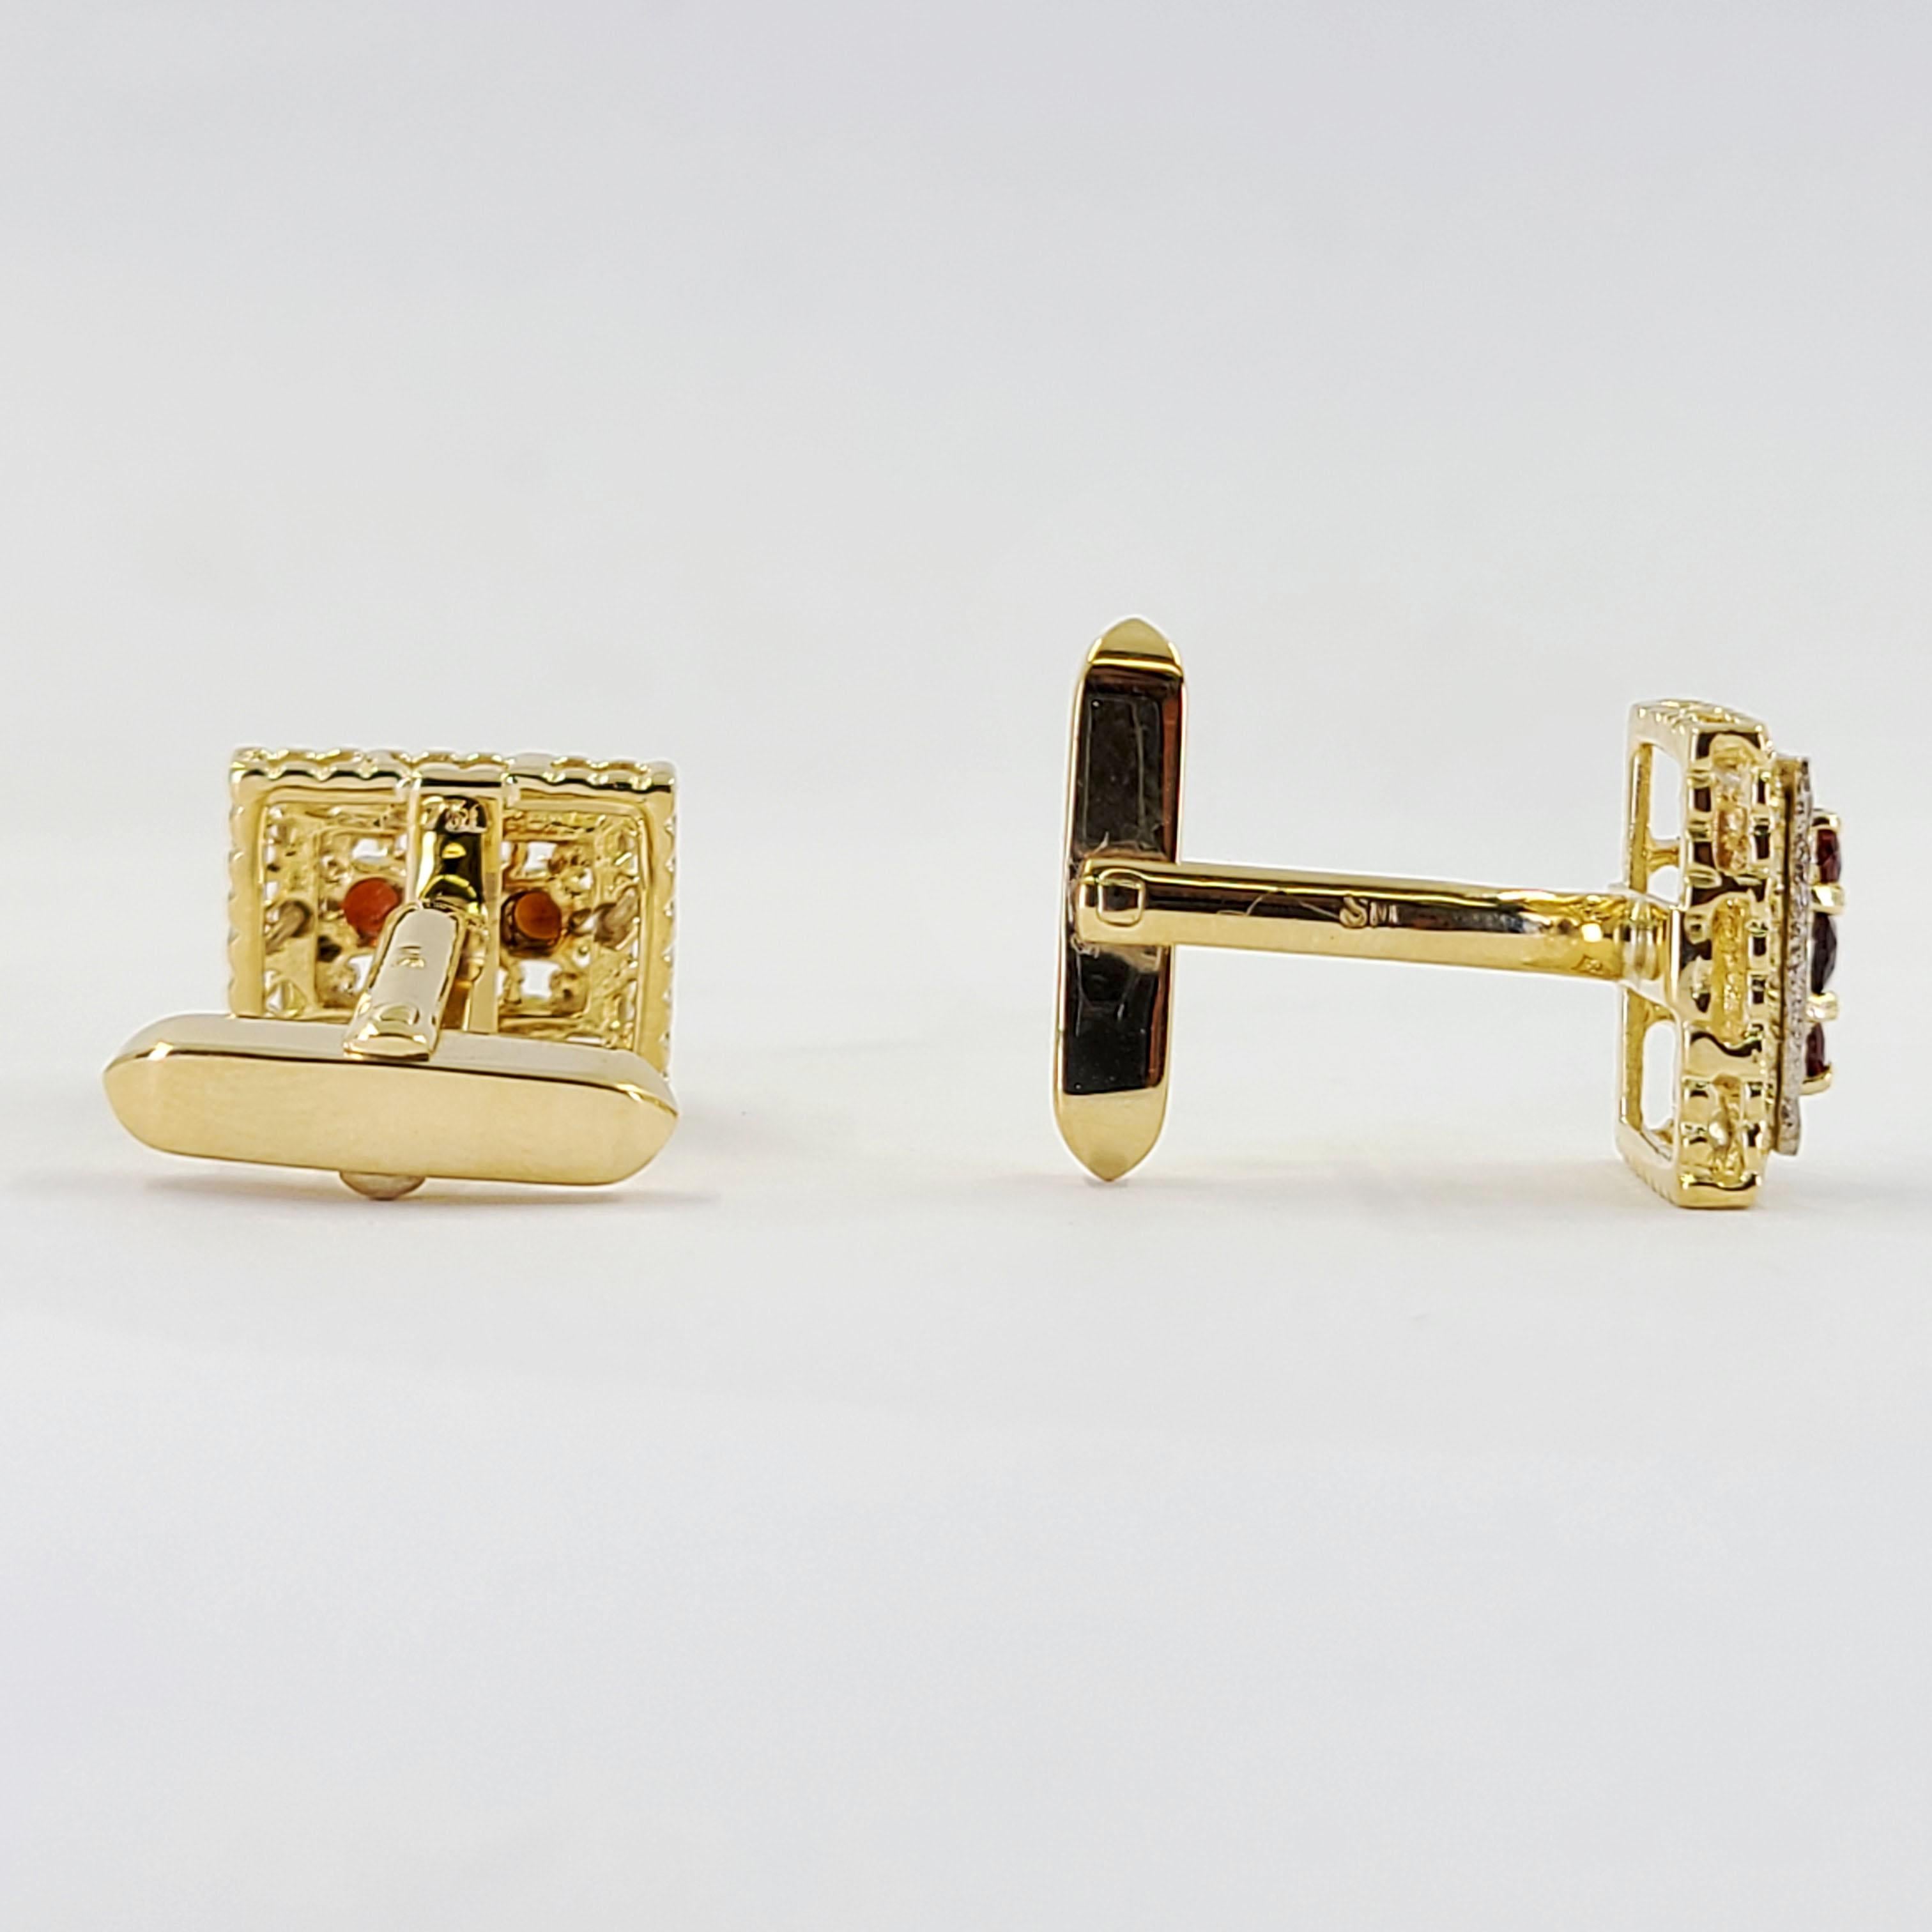 18 Karat Yellow Gold Cufflinks Featuring 6 Round Garnets Totaling 0.60 Carats Accented By A White Gold Pattern Border. Torpedo Style Backs. Finished Weight Is 12.0 Grams.